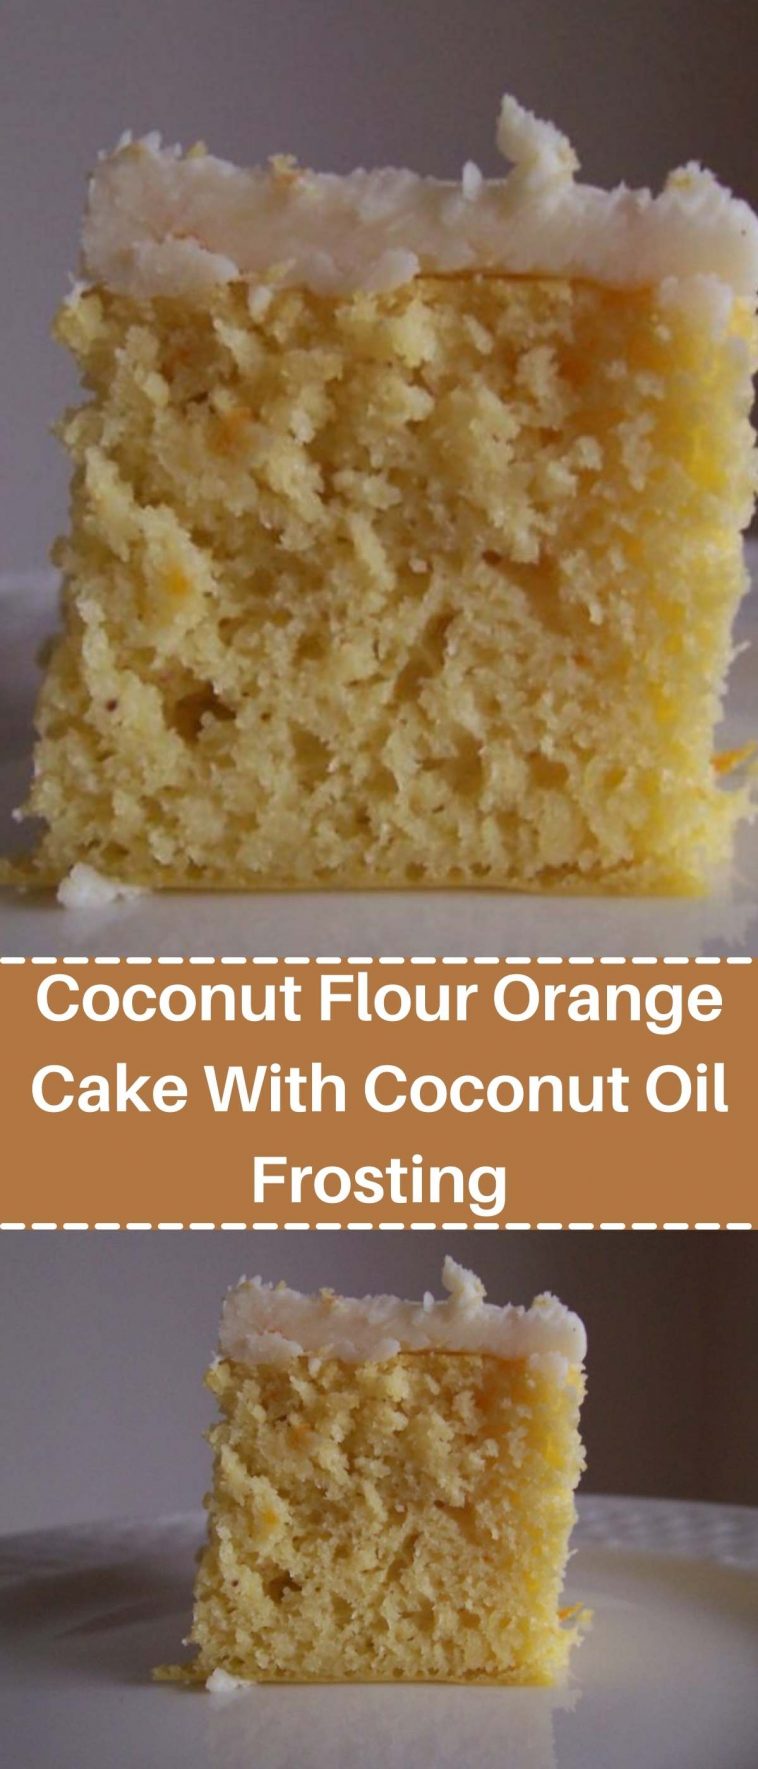 Coconut Flour Orange Cake With Coconut Oil Frosting